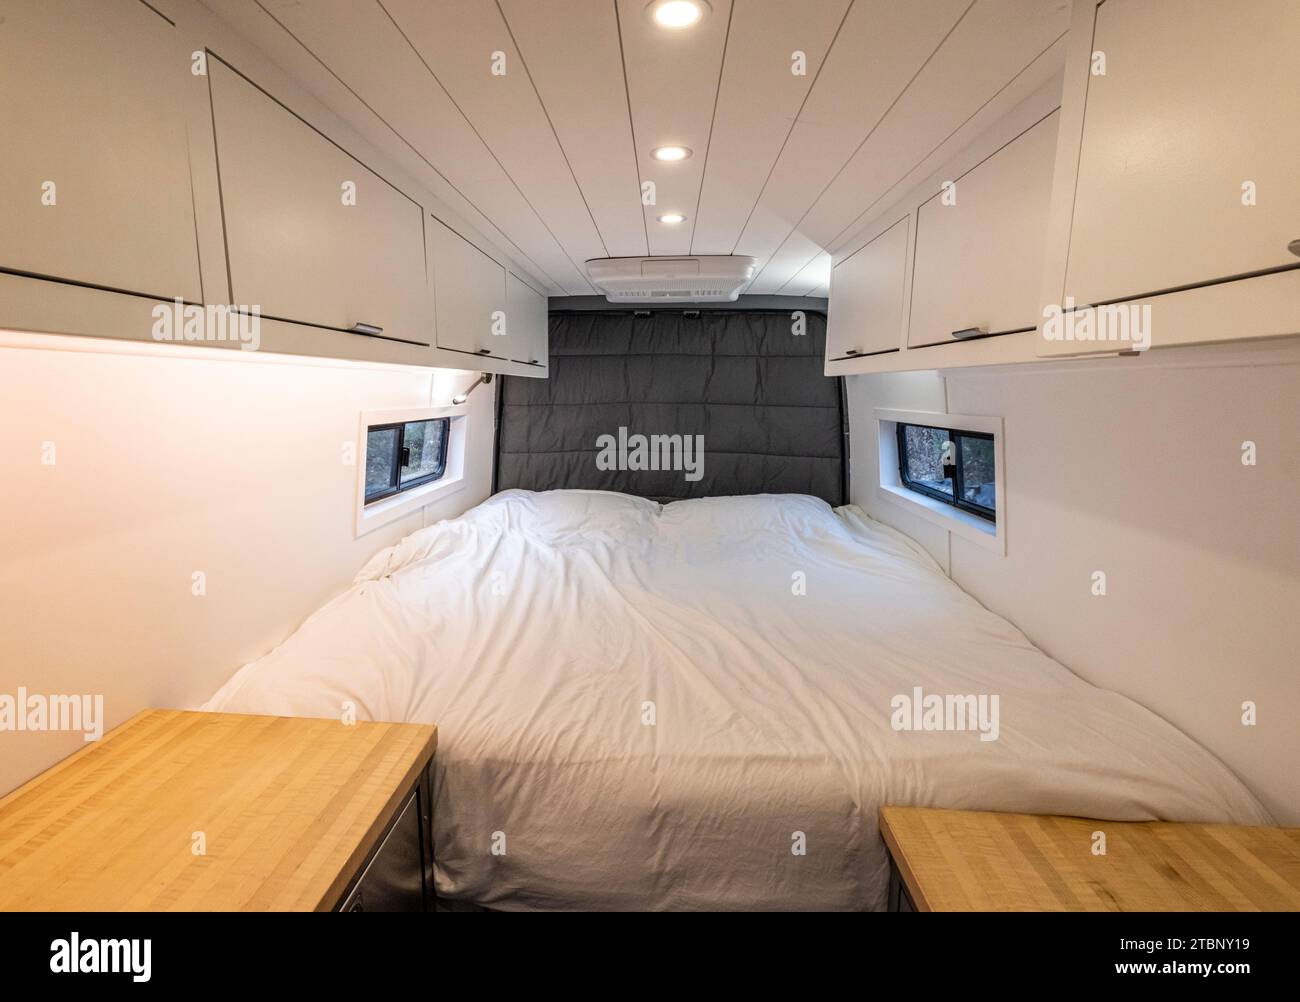 Bed room area of a converted sprinter van camper Stock Photo